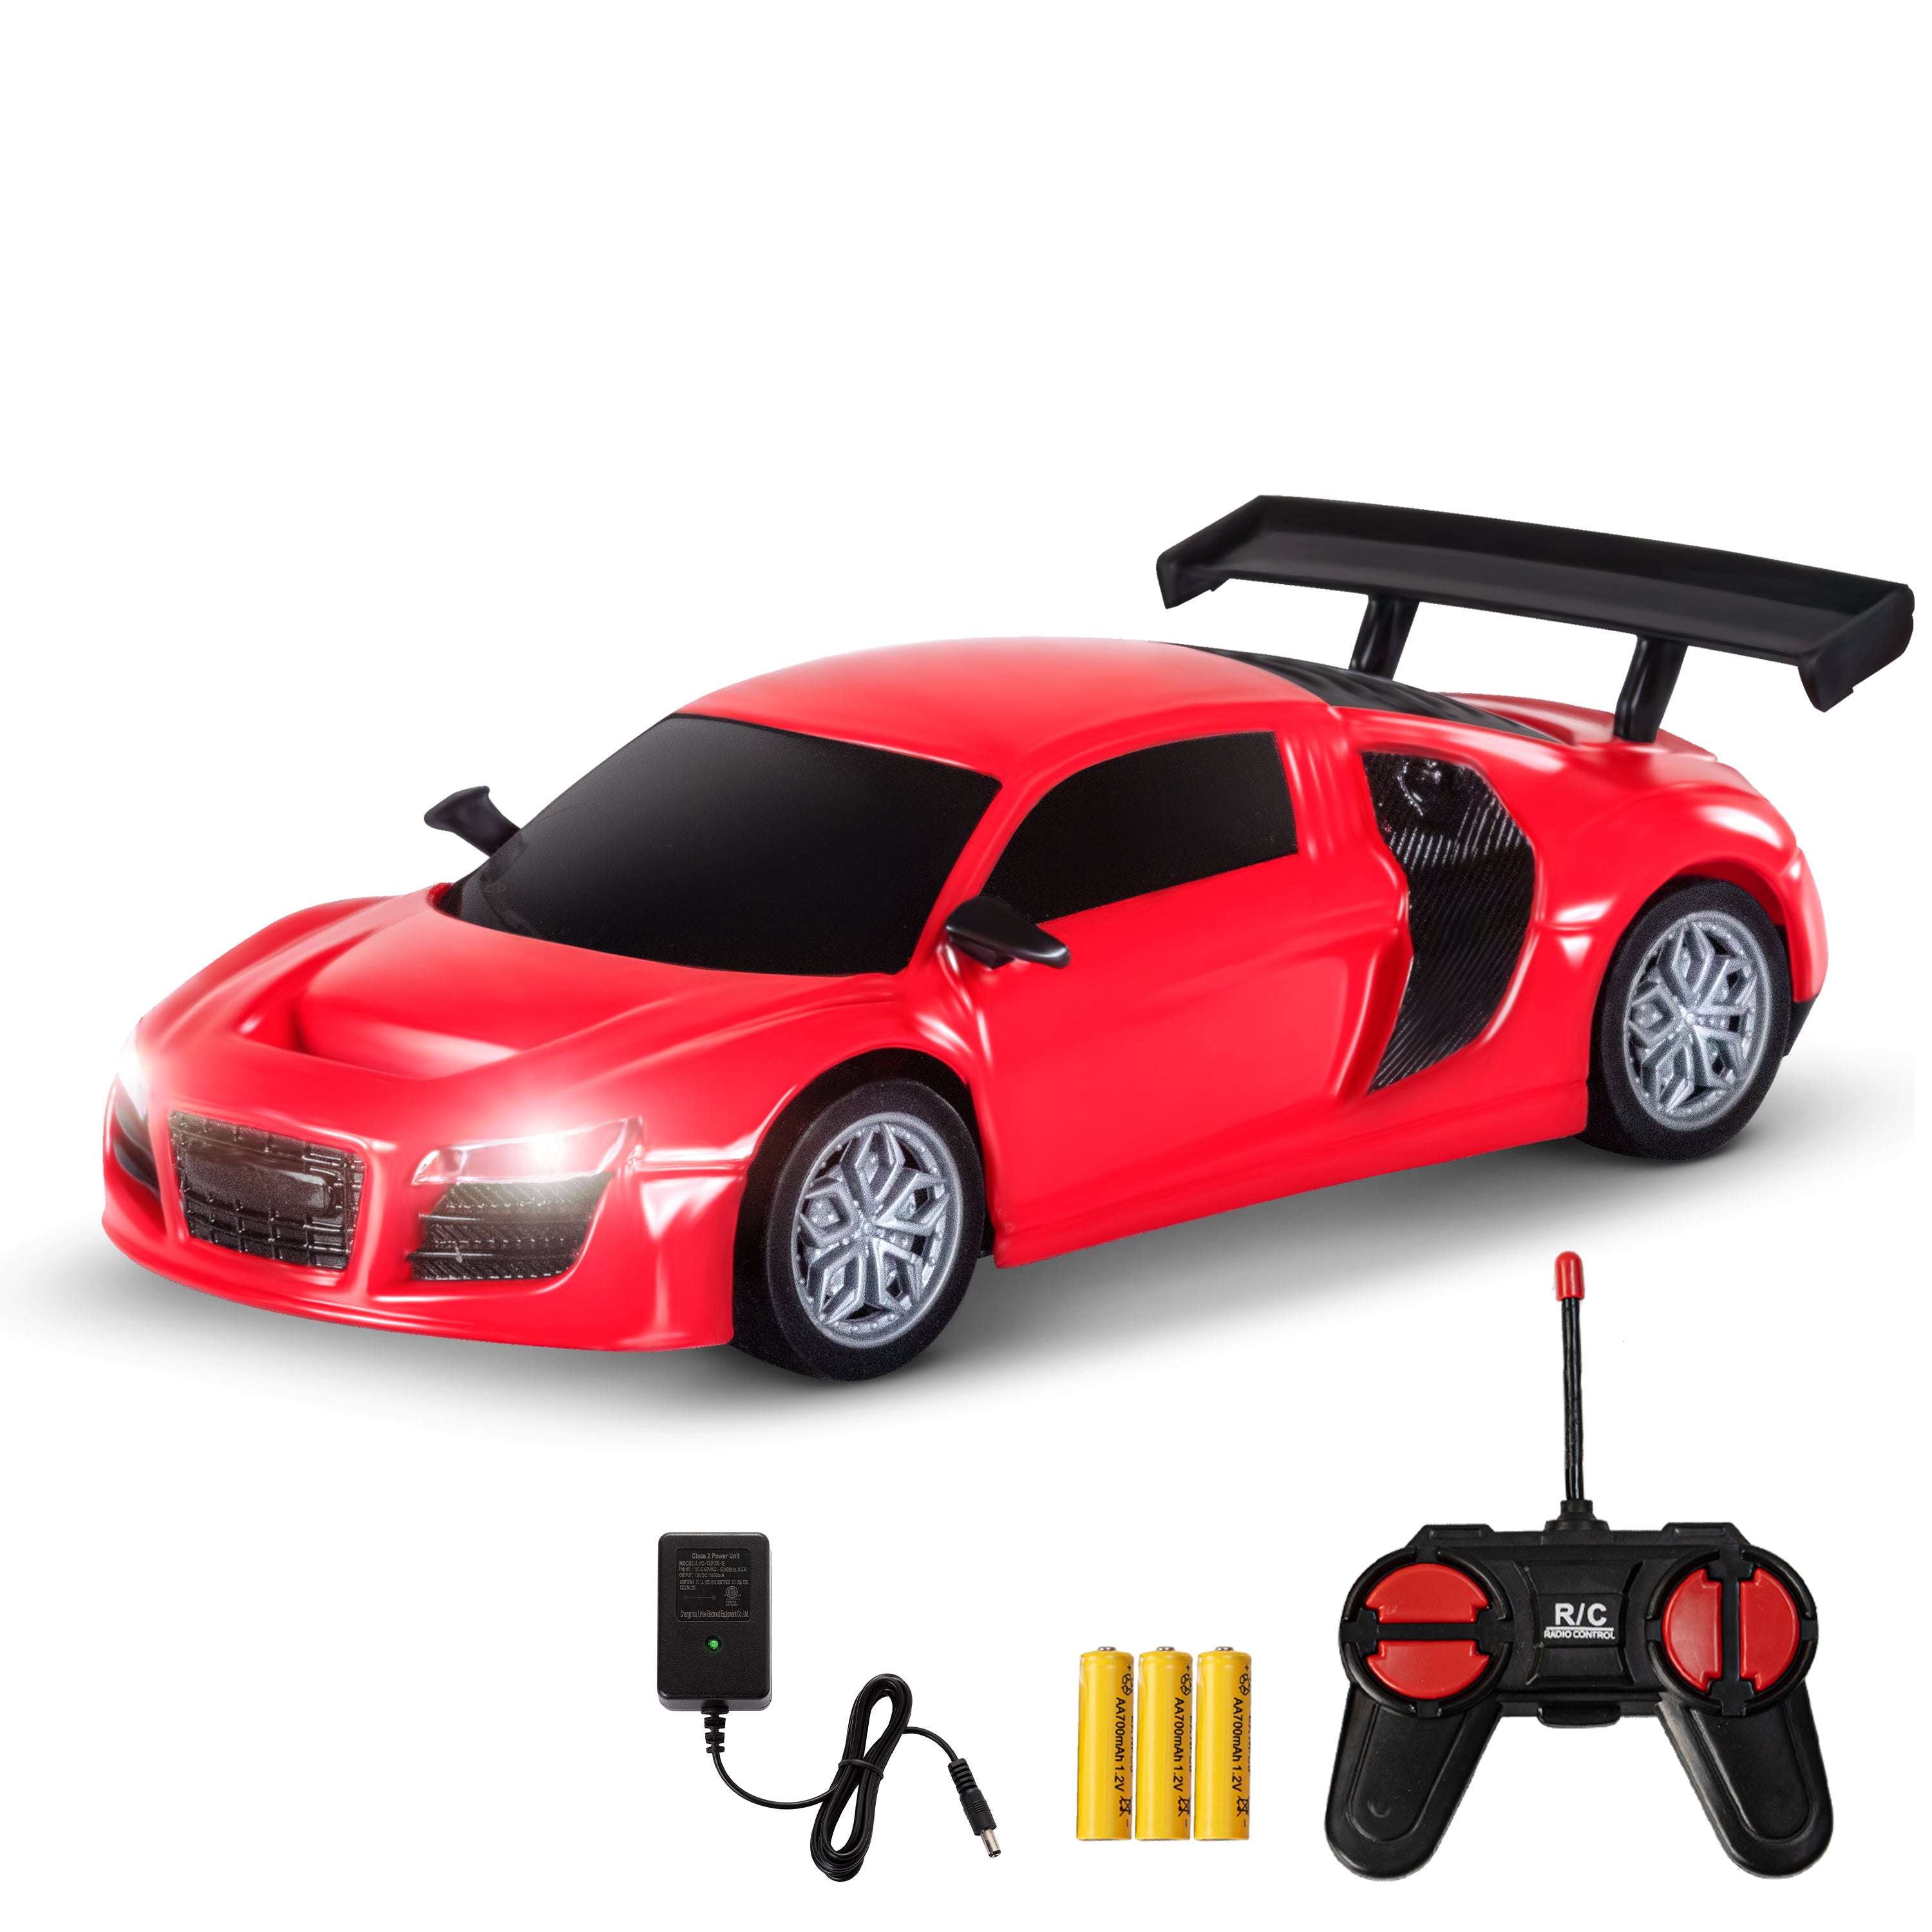 Baybee RC Cars for Kids, Remote Control Toy Car